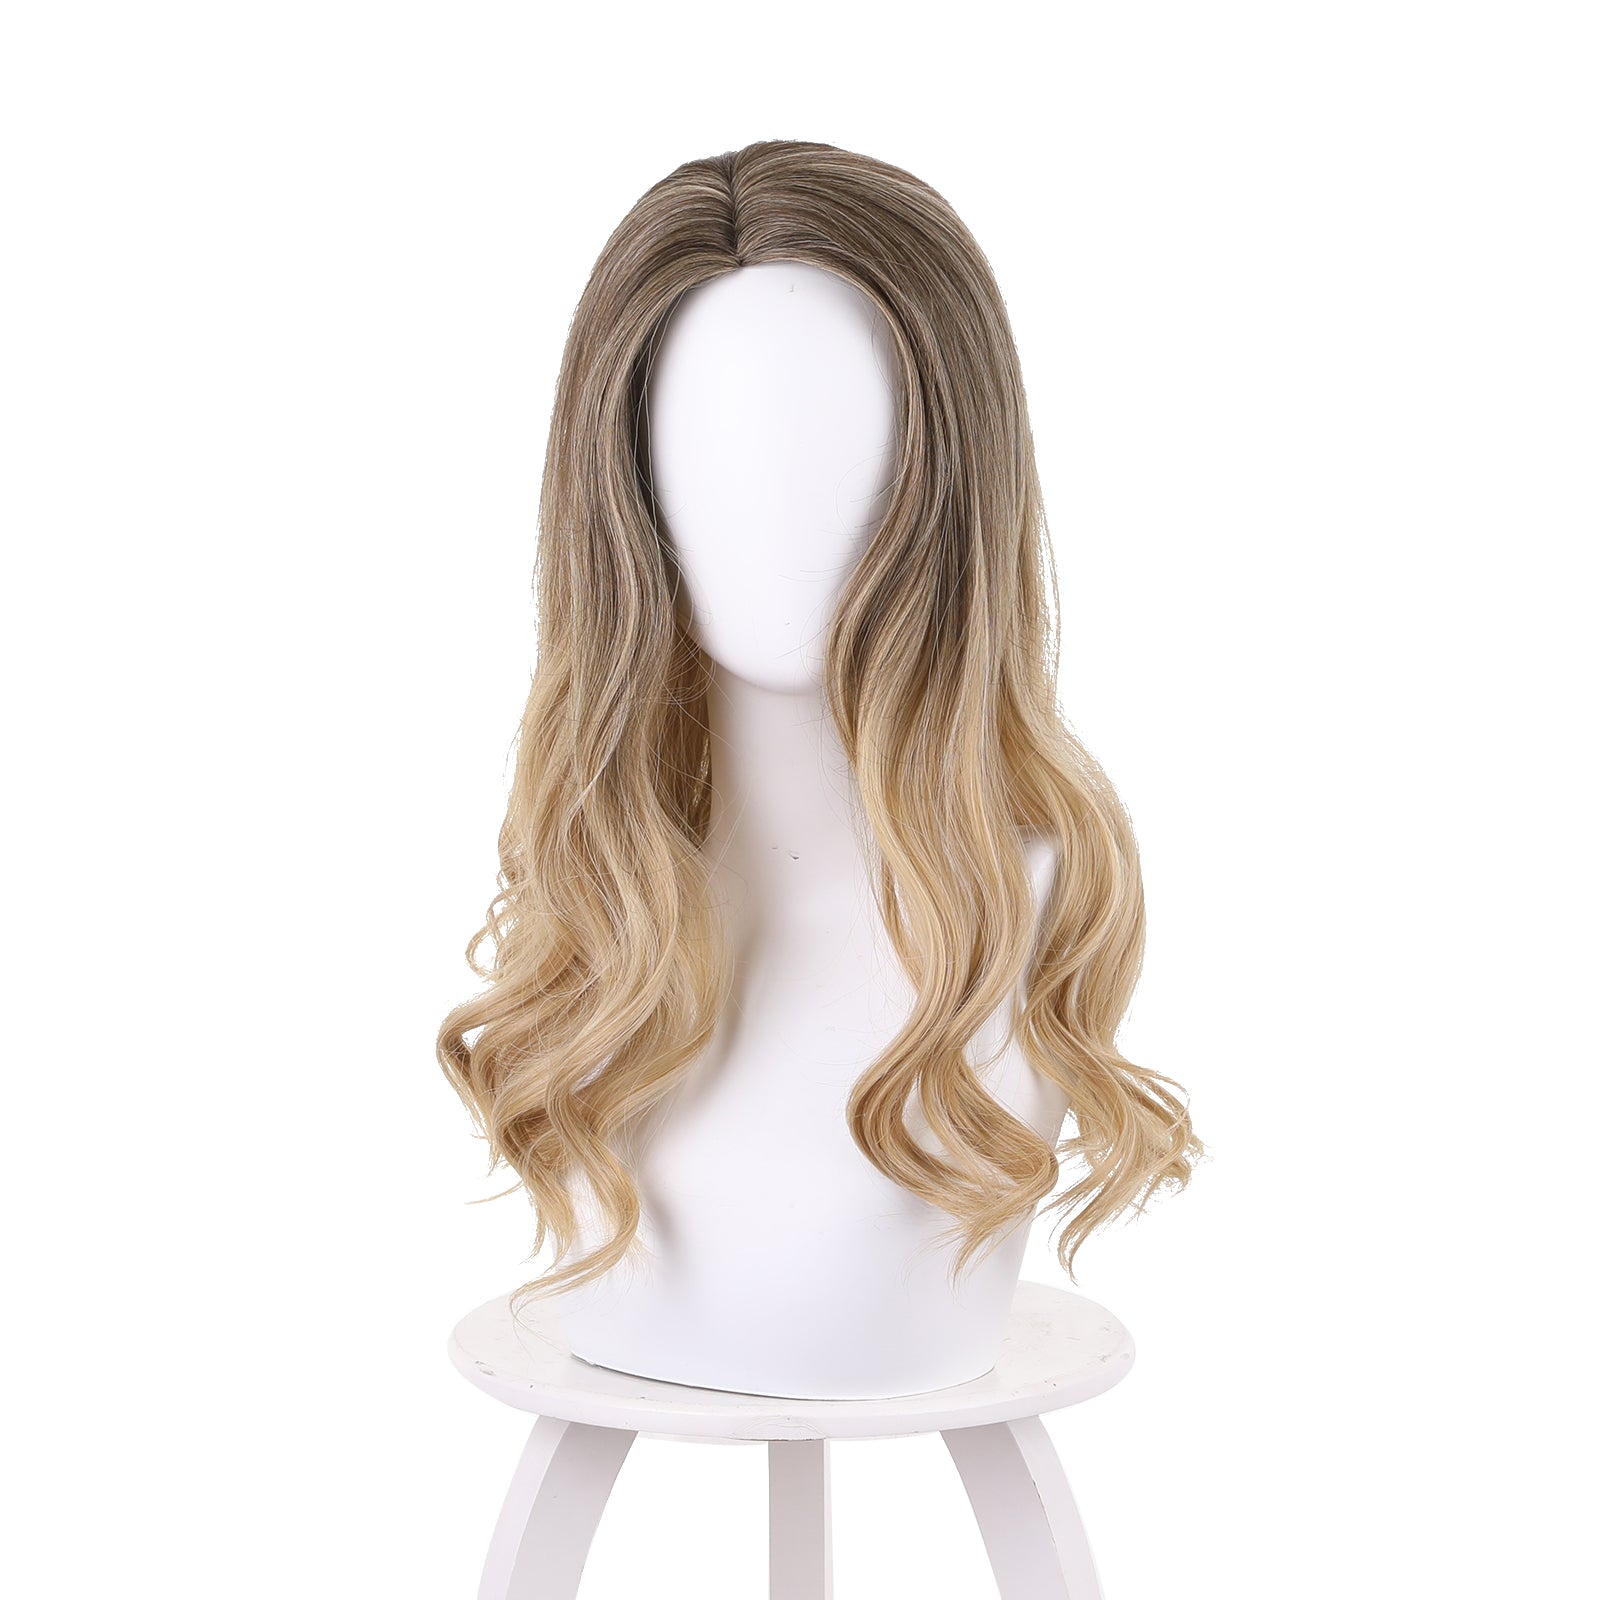 Rulercosplay Thor Love and Thunder Cosplay Wig of Jane Foster Movie Cosplay Wig